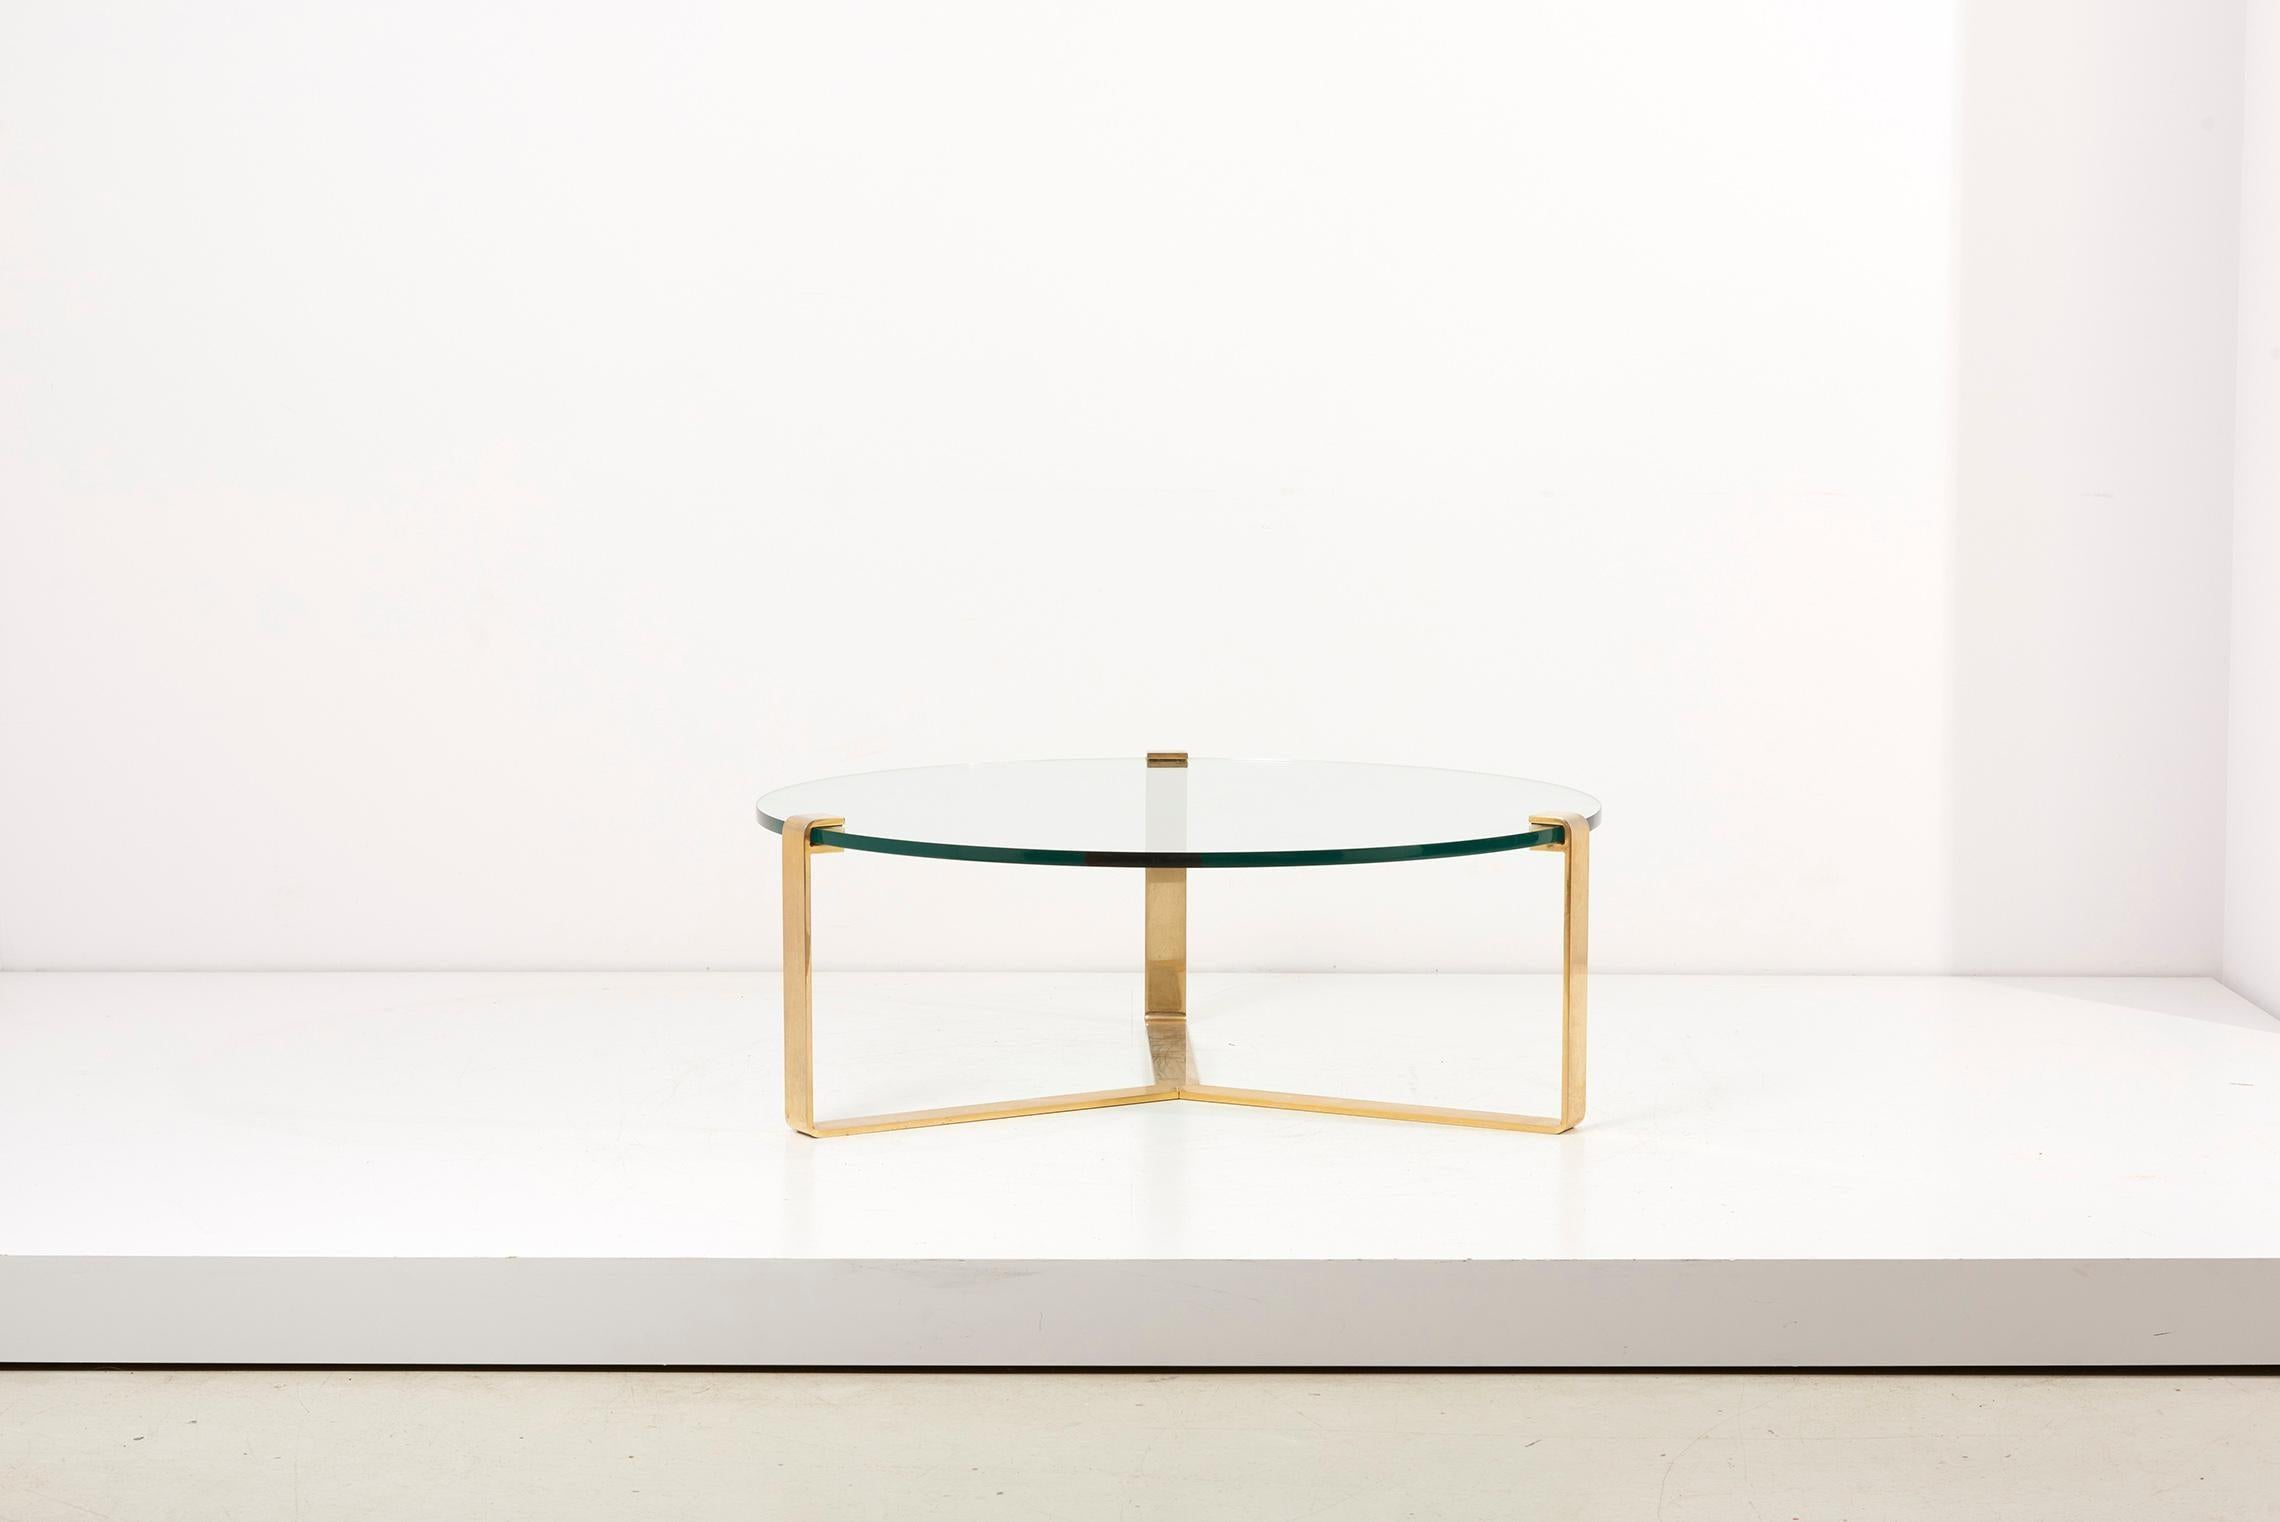 Huge brass and glass coffee table, 1970s.